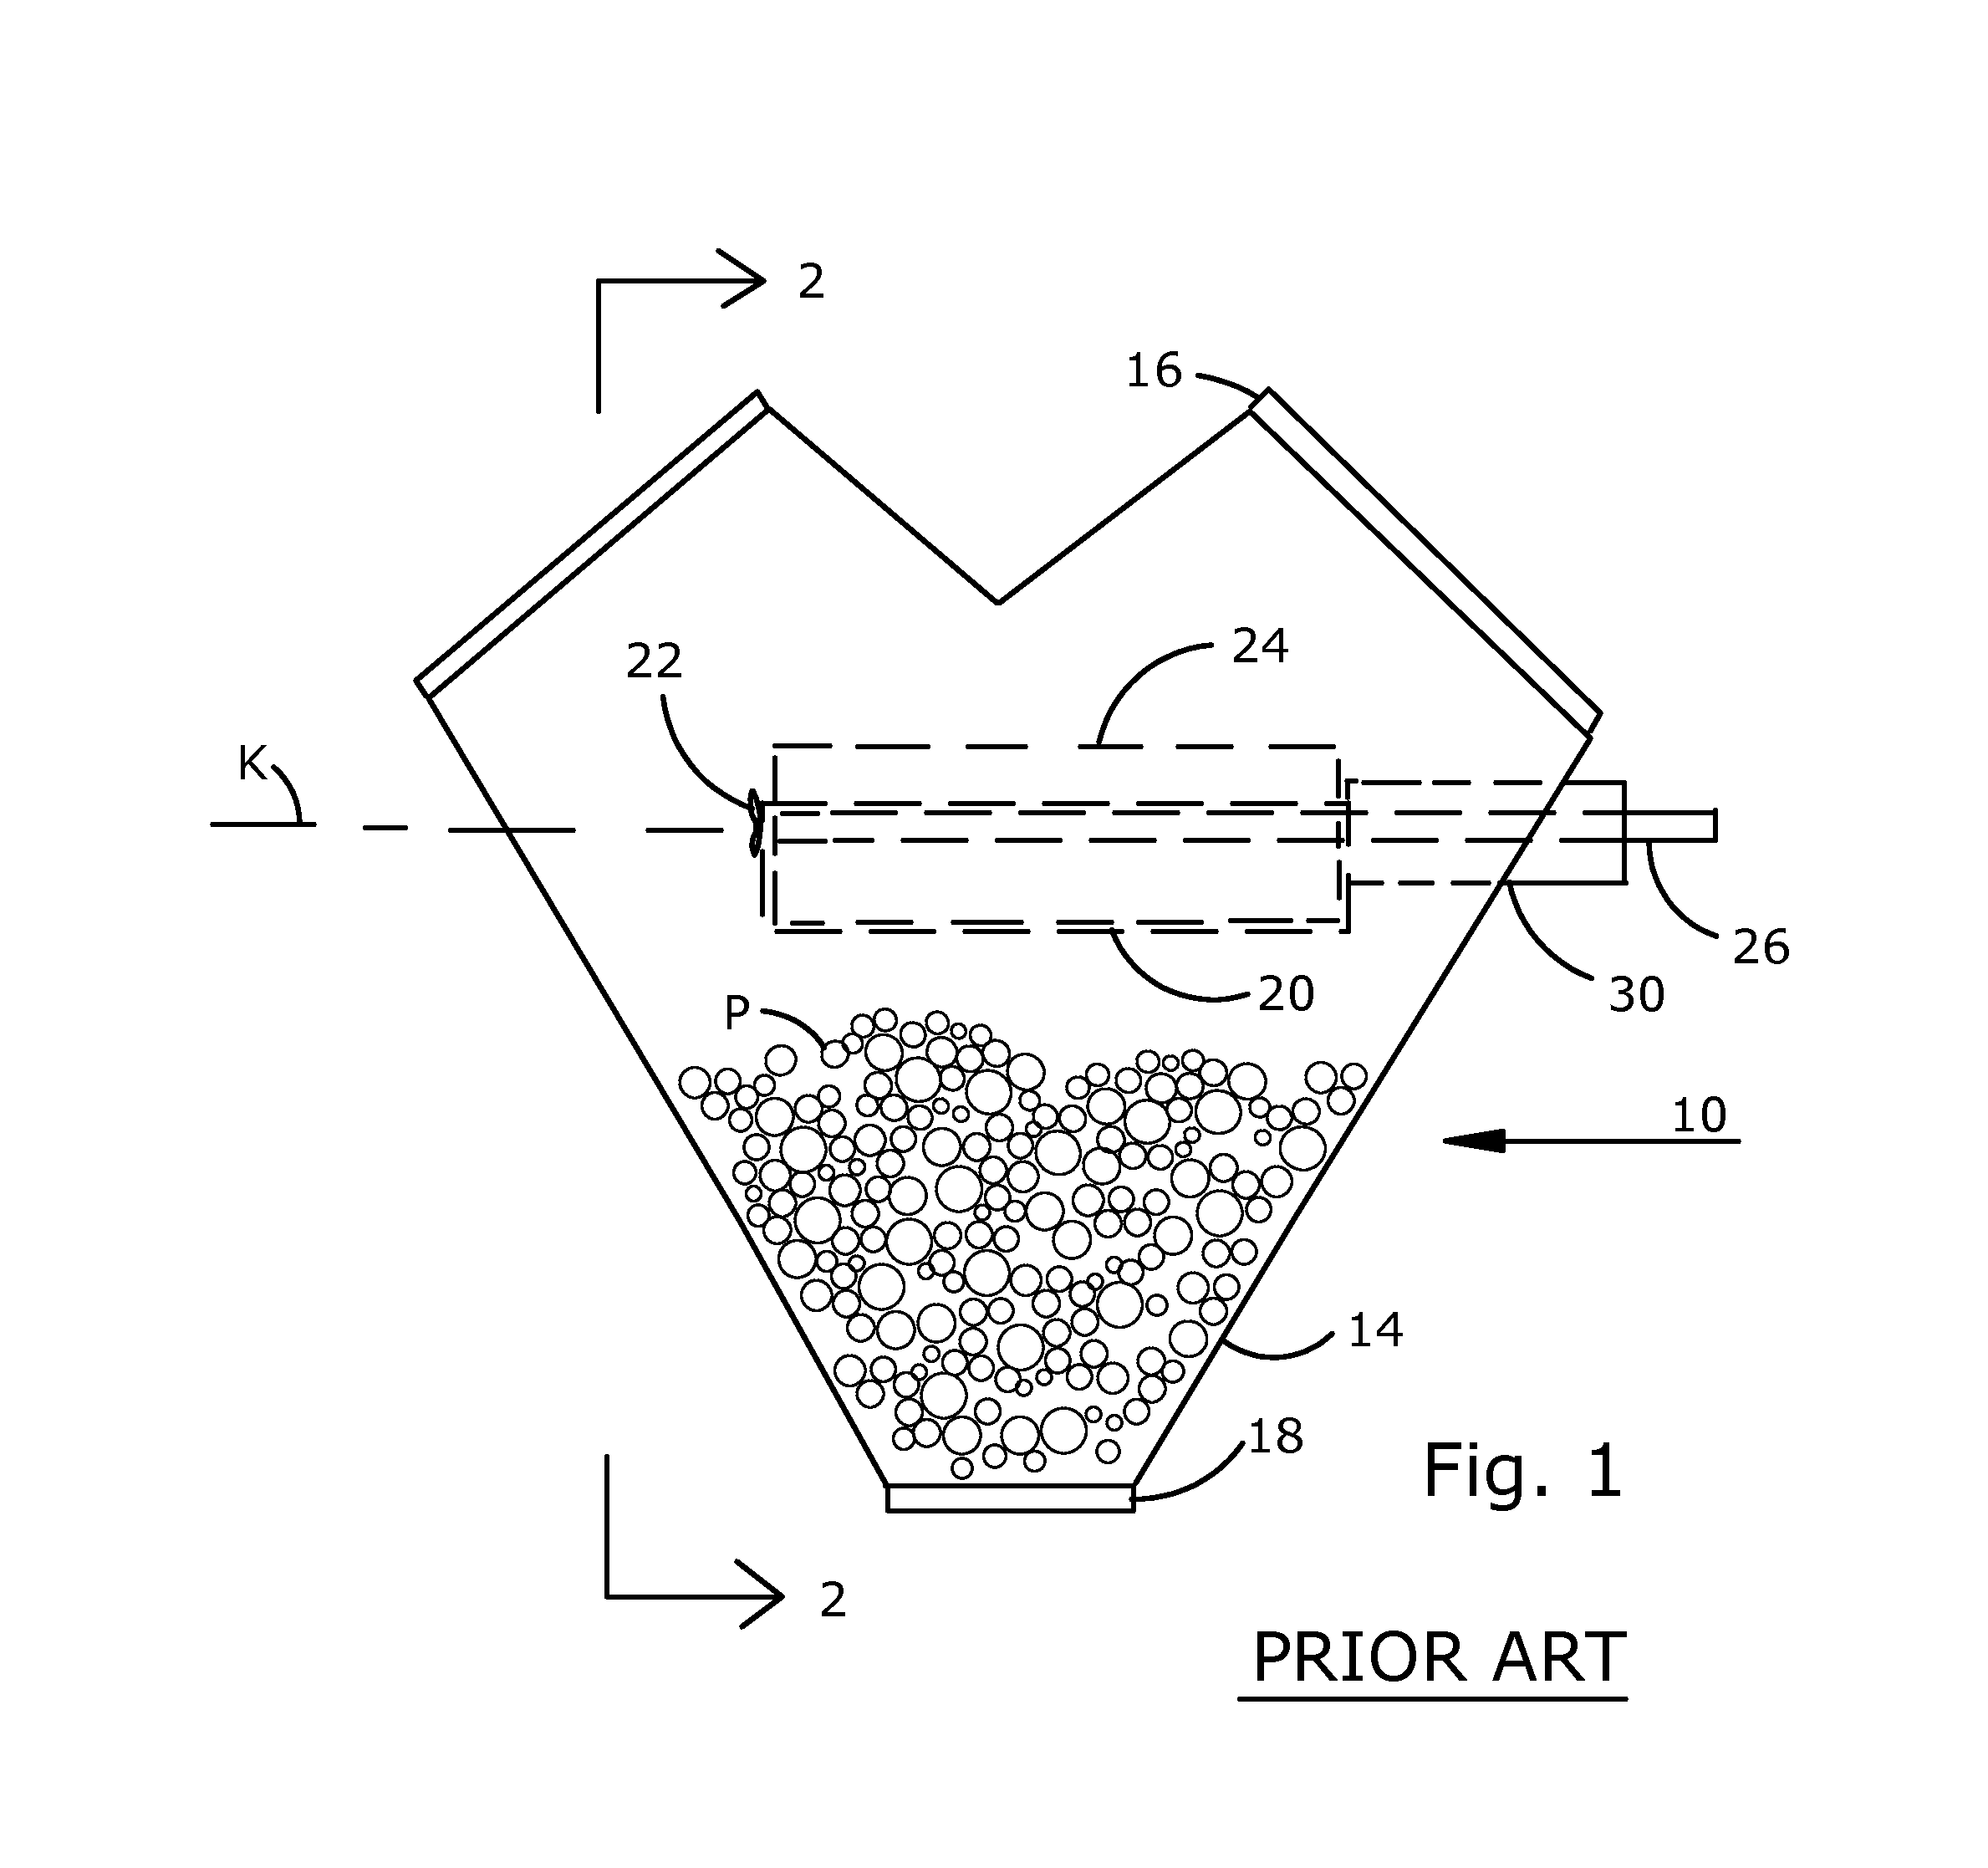 Apparatus for alternately sifting and blending powders in the same operation